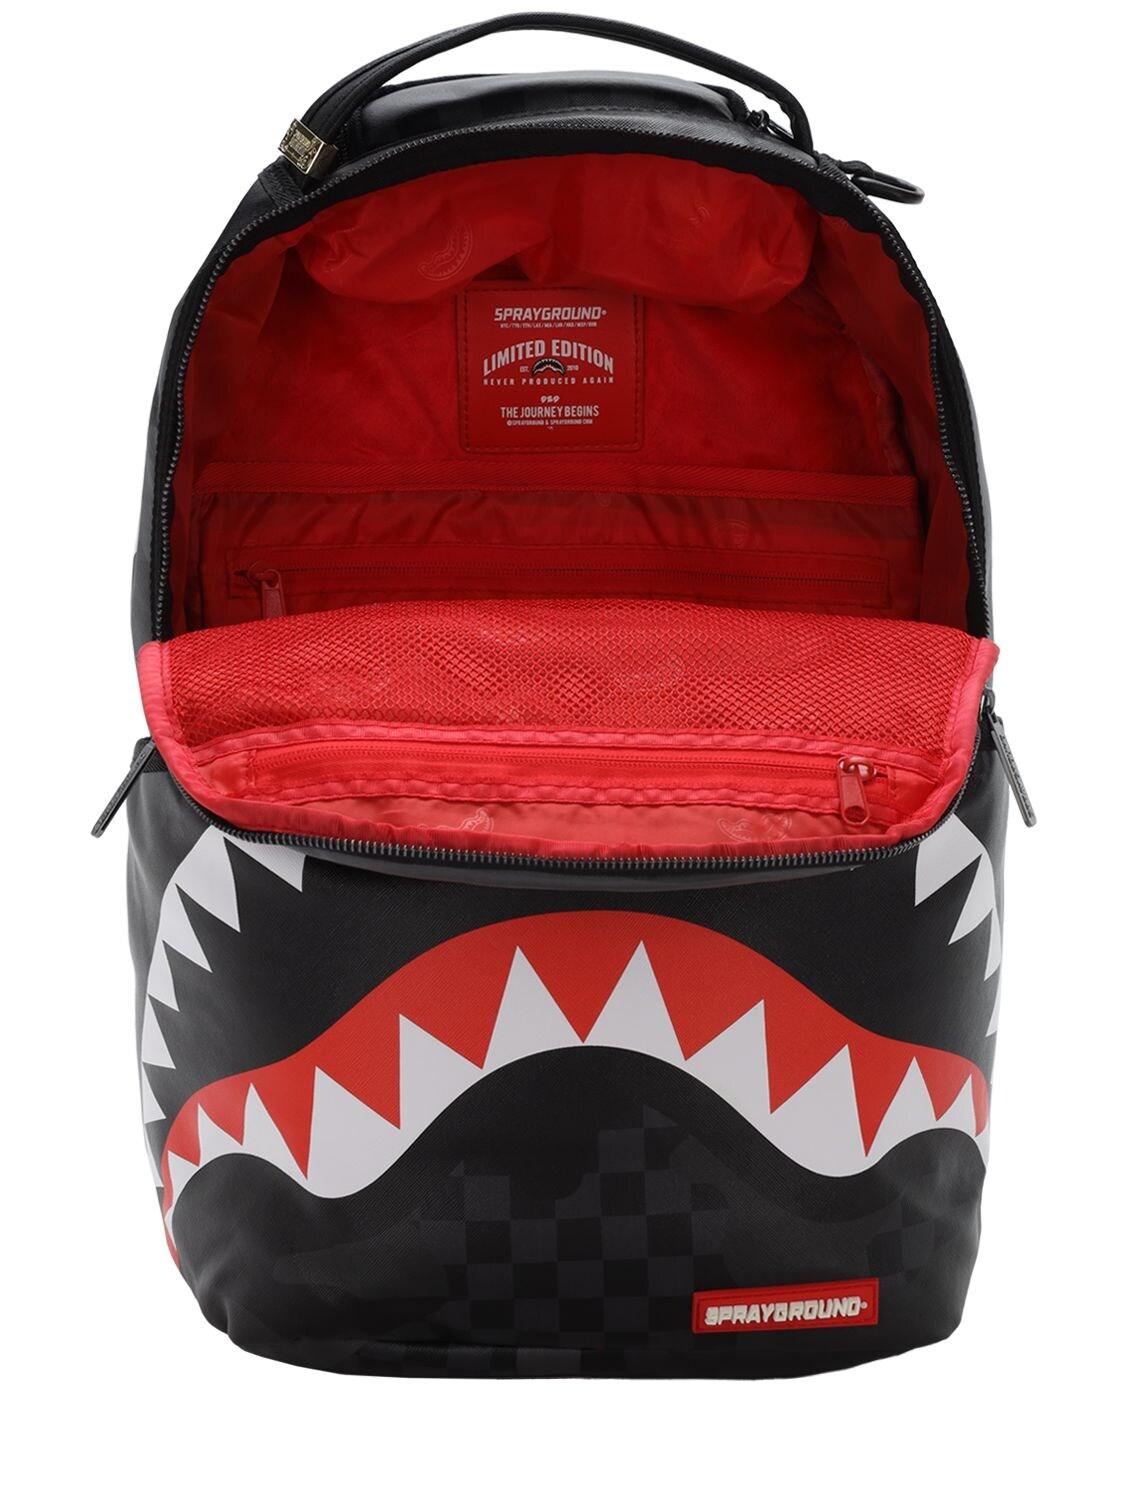 Sprayground Leather 3am Limited Edition Shark Backpack In Black Camo Black For Men Save 24 Lyst